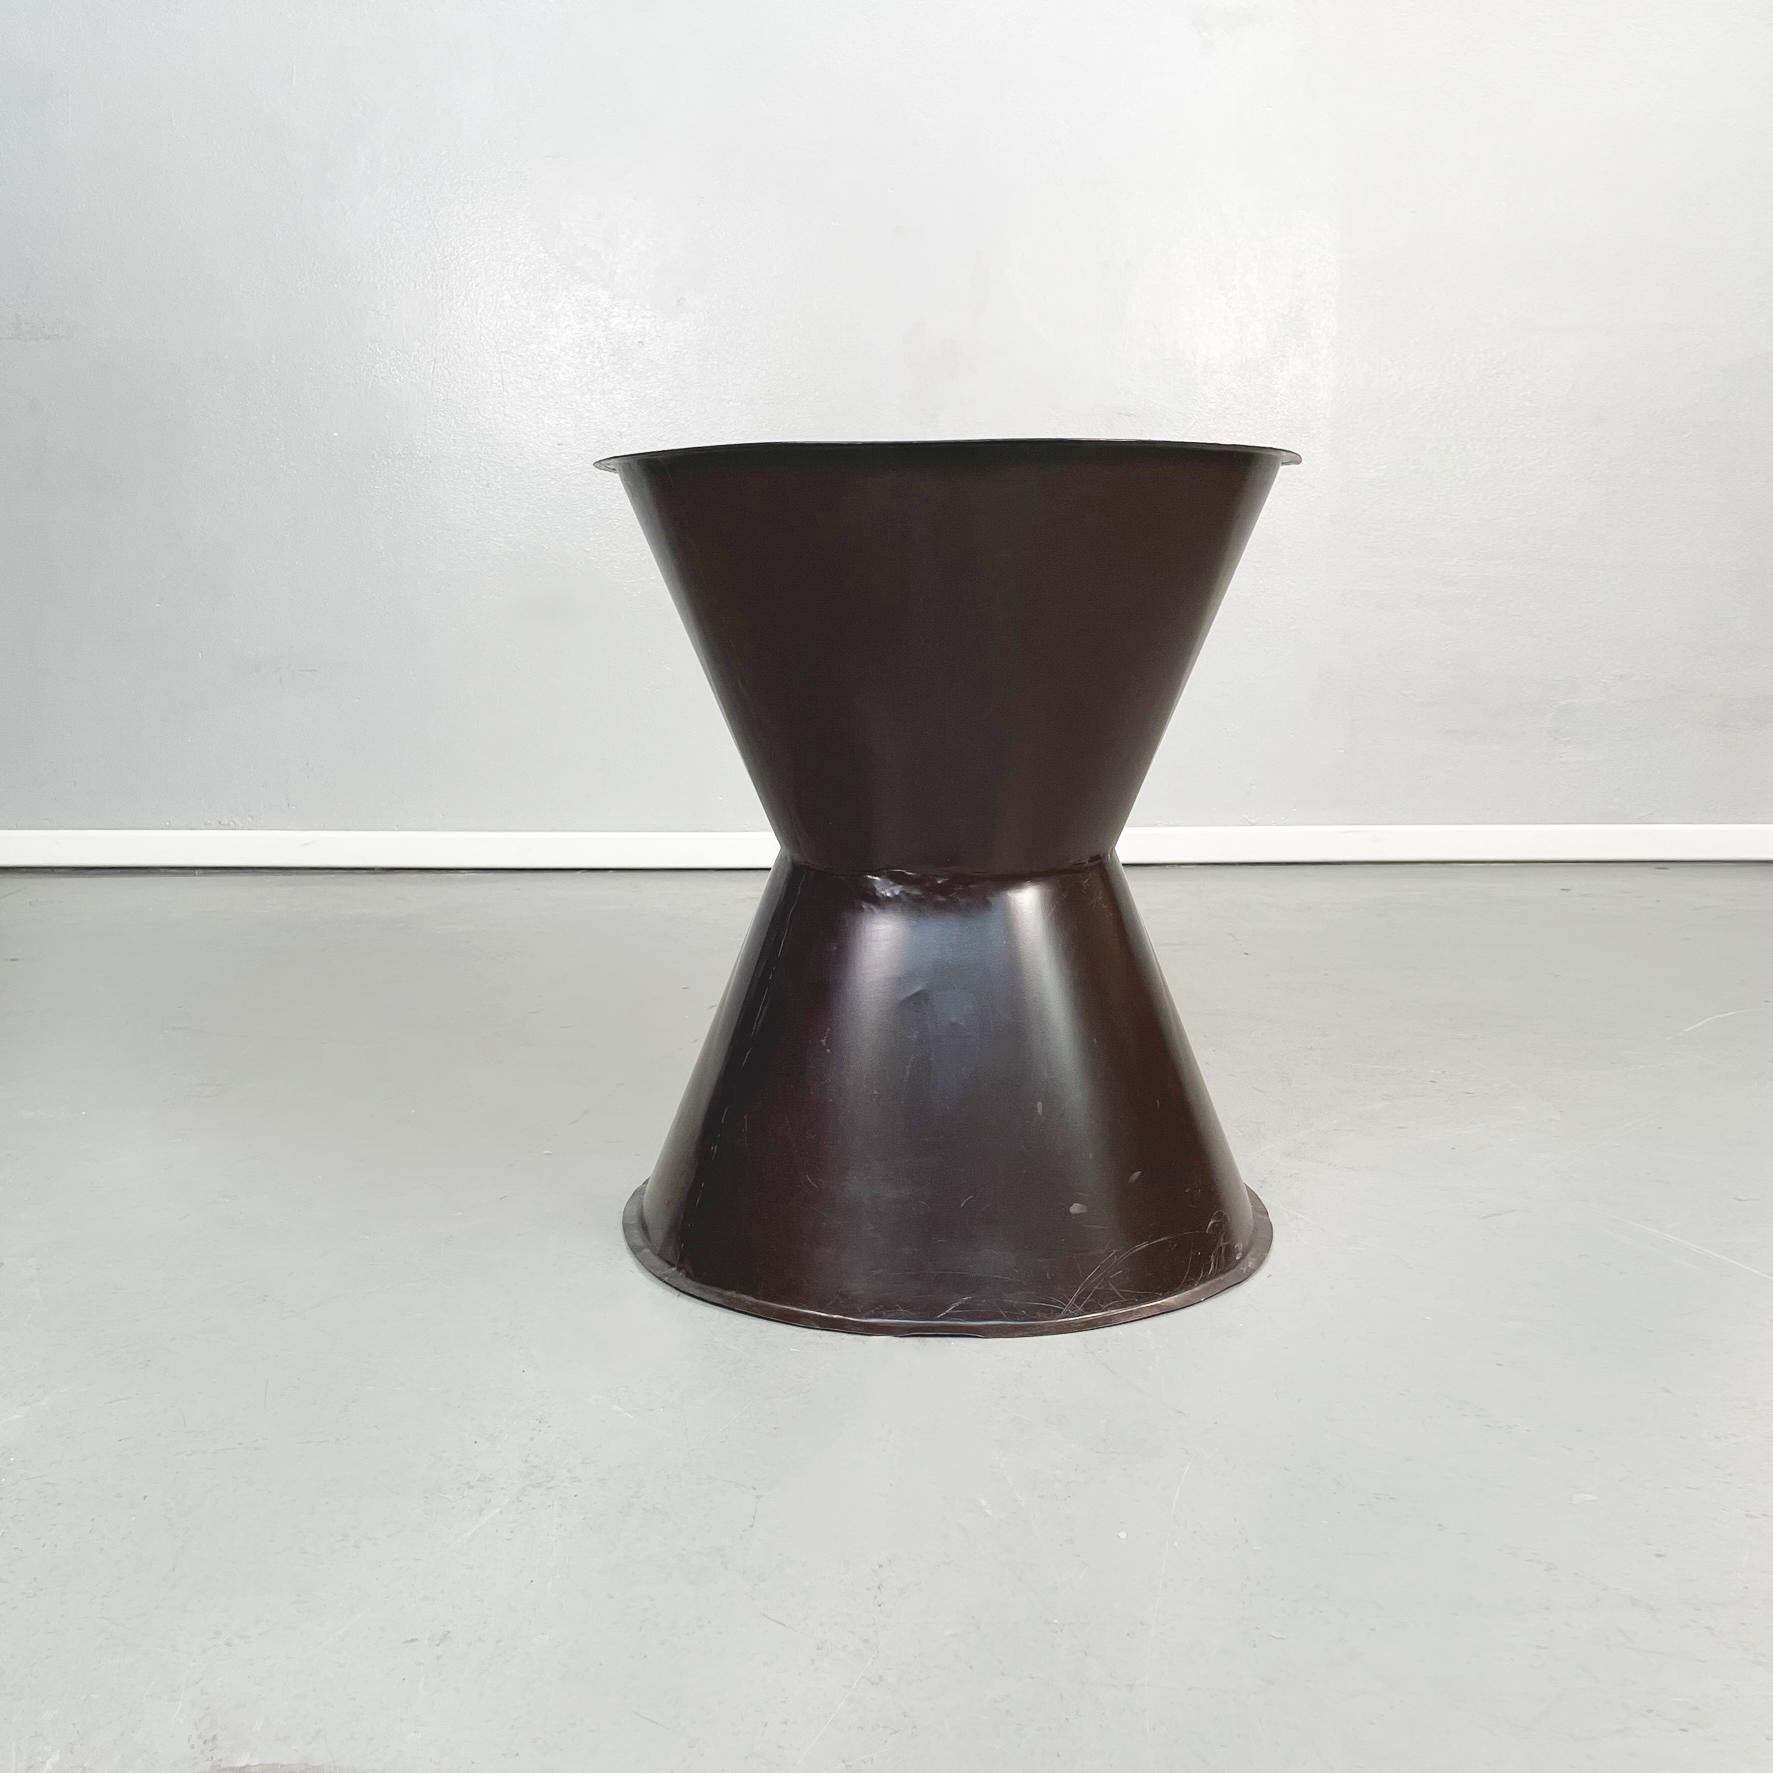 Asian modern Ethnic table and stools in brown metal with drawing, 1990s
Set consisting of a table and two round stools in brown painted metal. The table and stools have an hourglass shape. On the table top and on the seats there are drawings